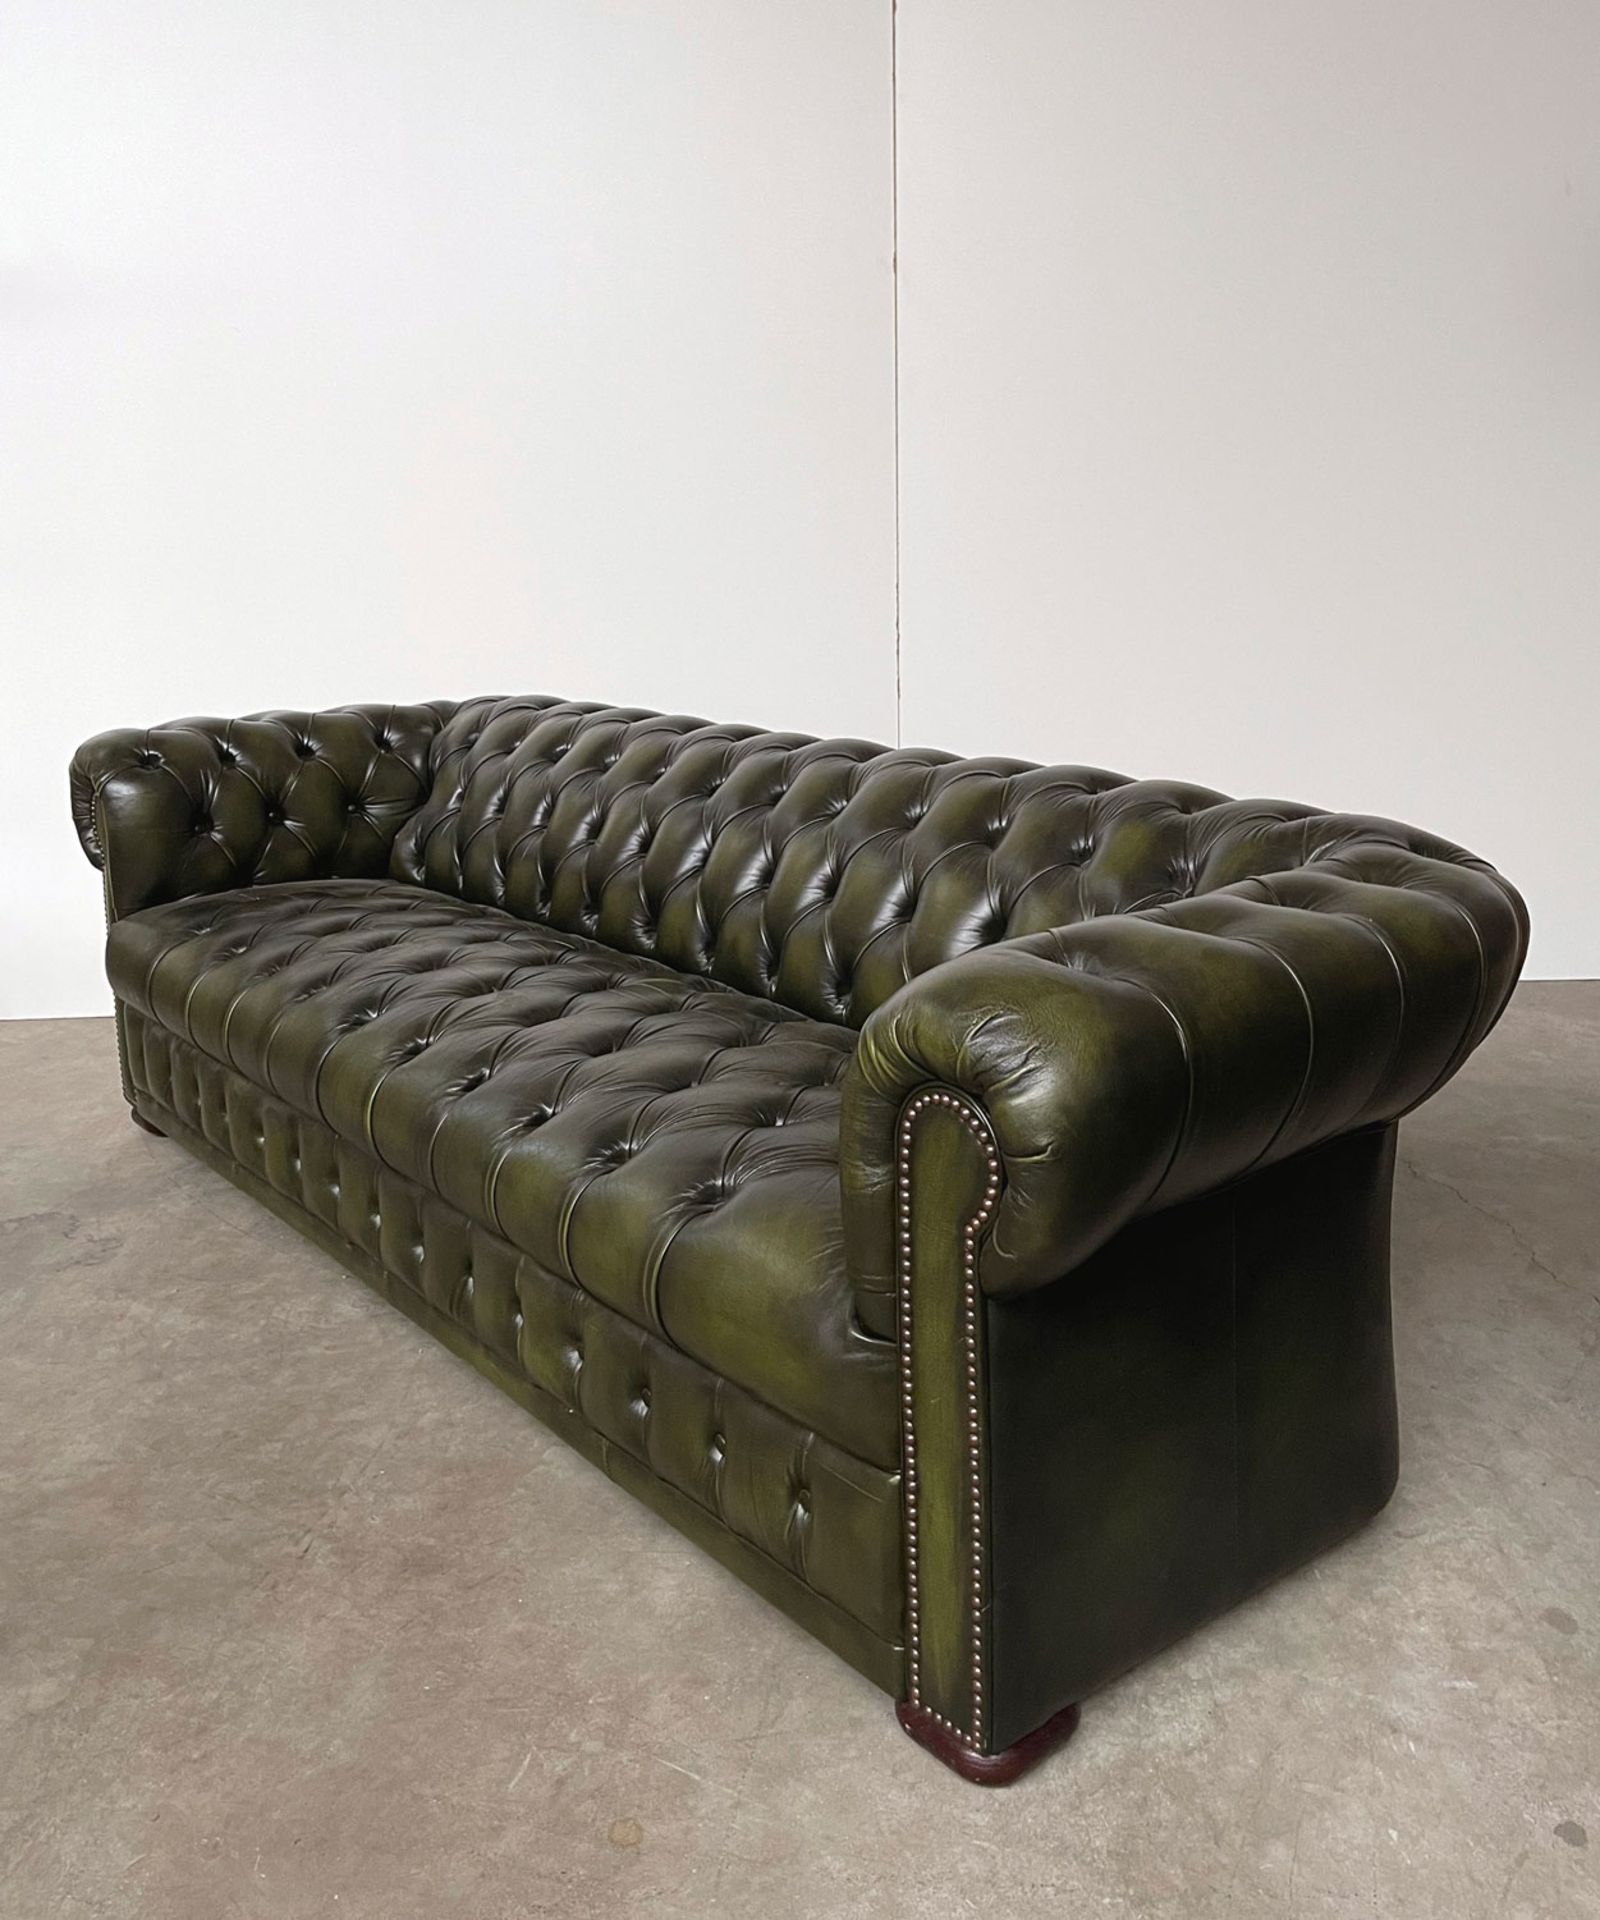 Green Leather Chesterfield Sofa - Image 8 of 10